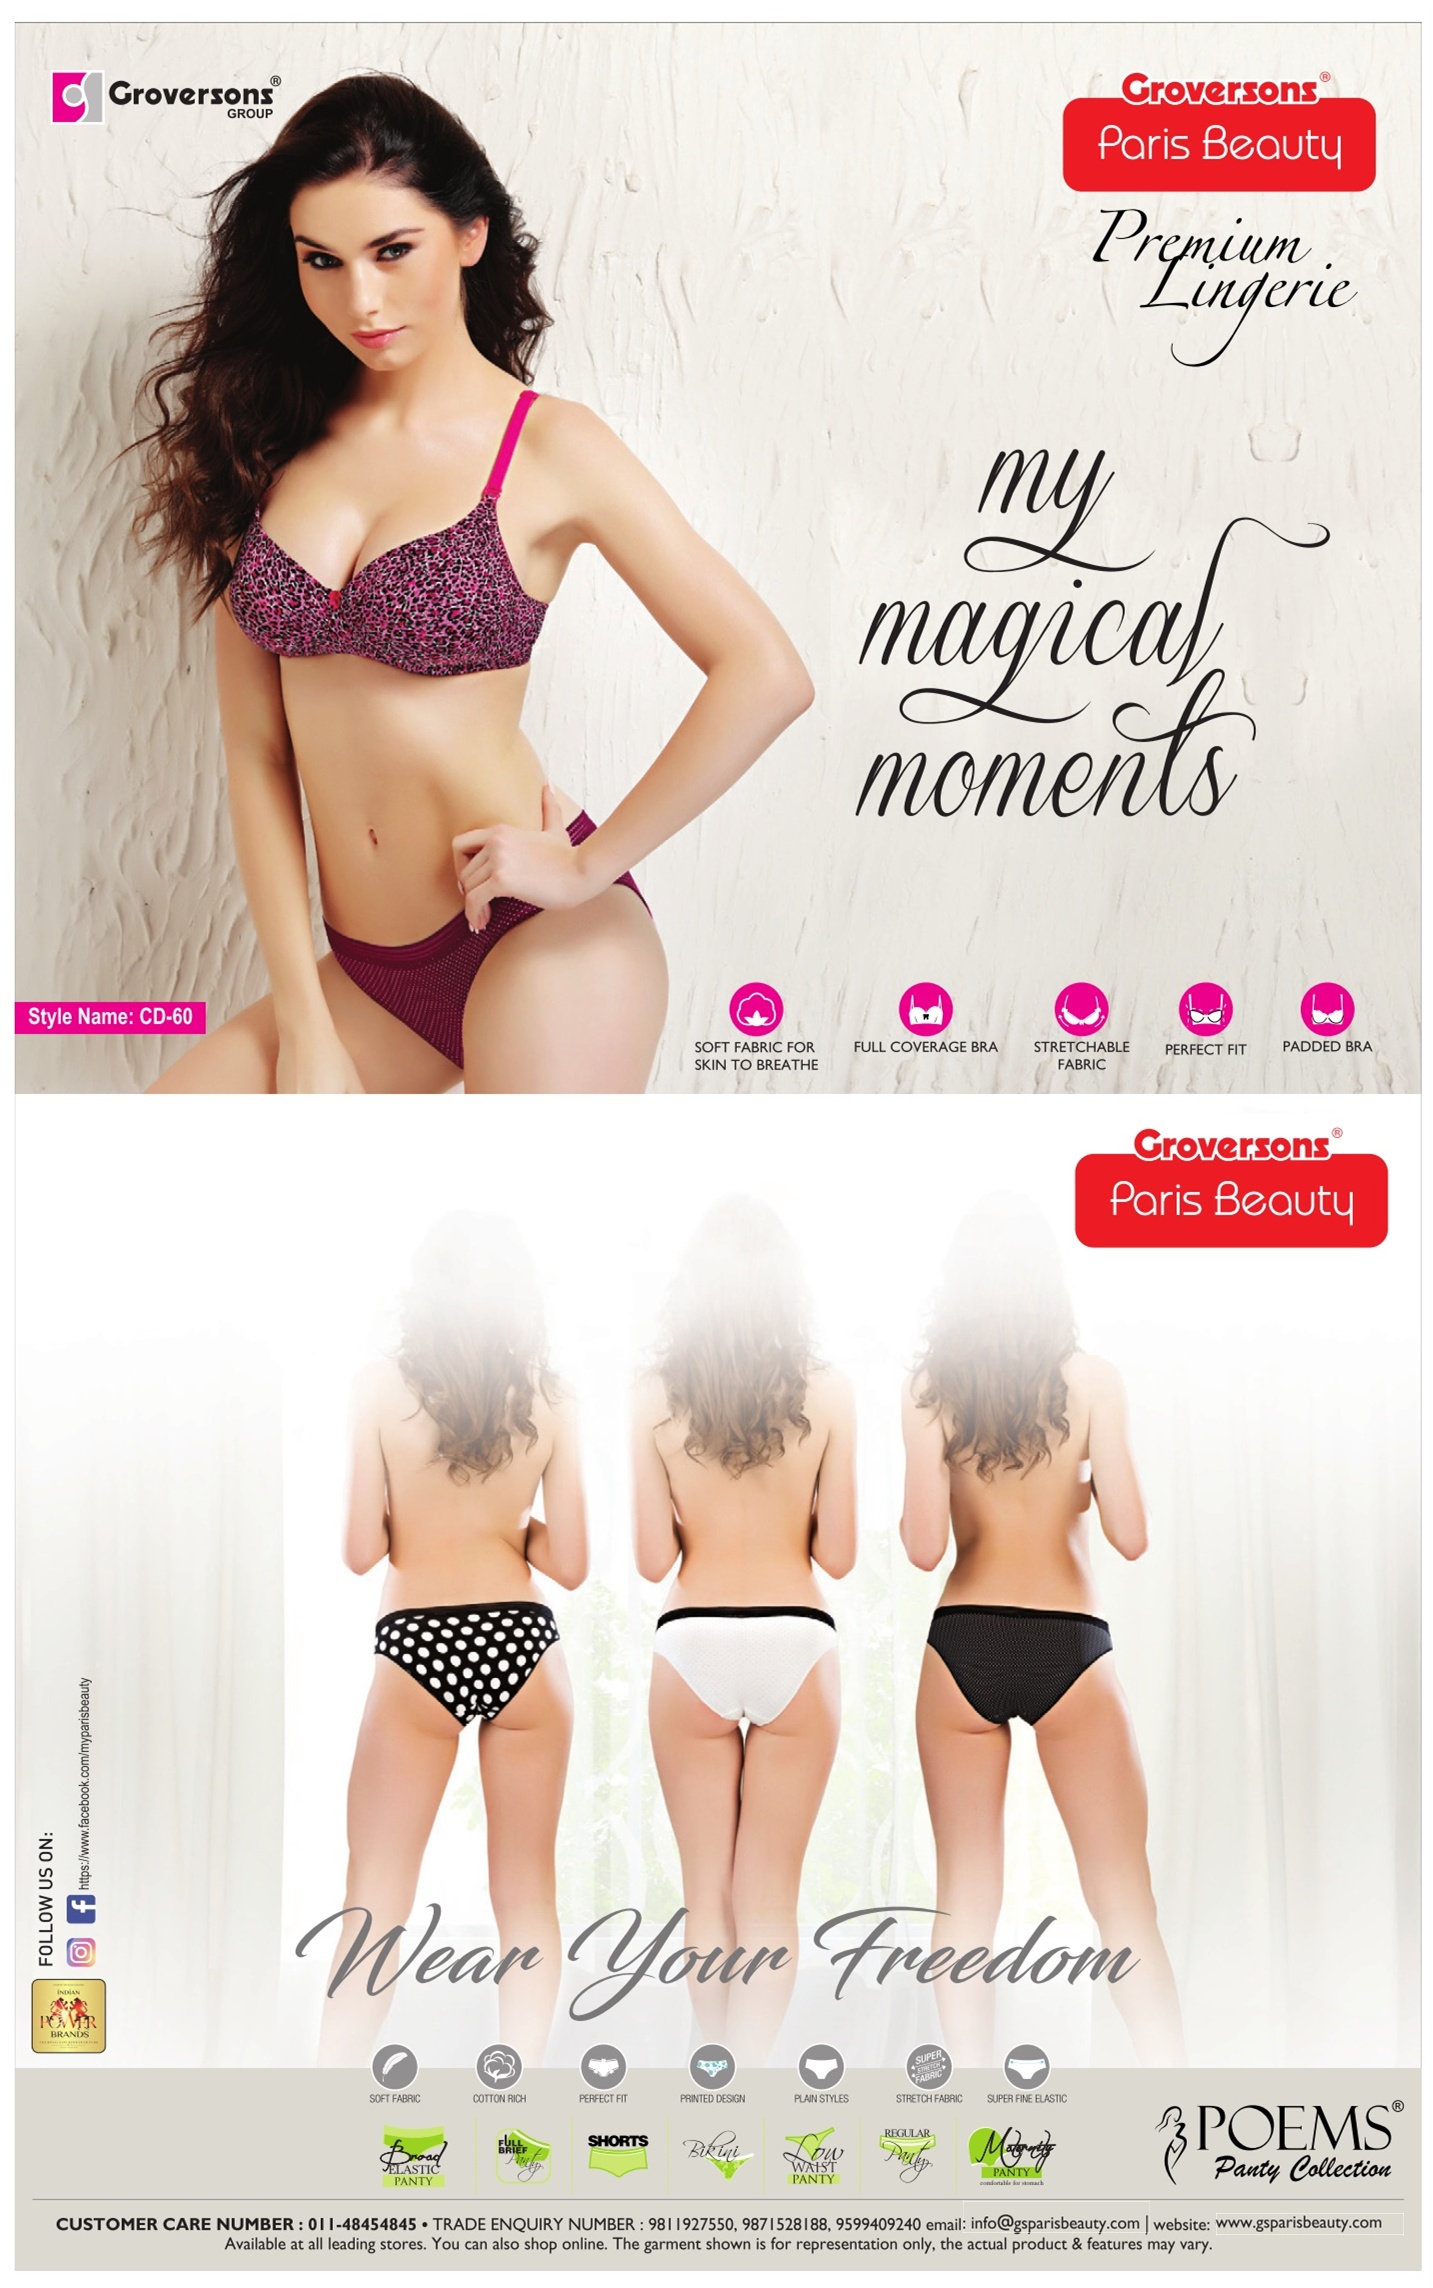 Groversons Paris Beauty Premium Lingerie My Magical Moments Ad - Advert  Gallery